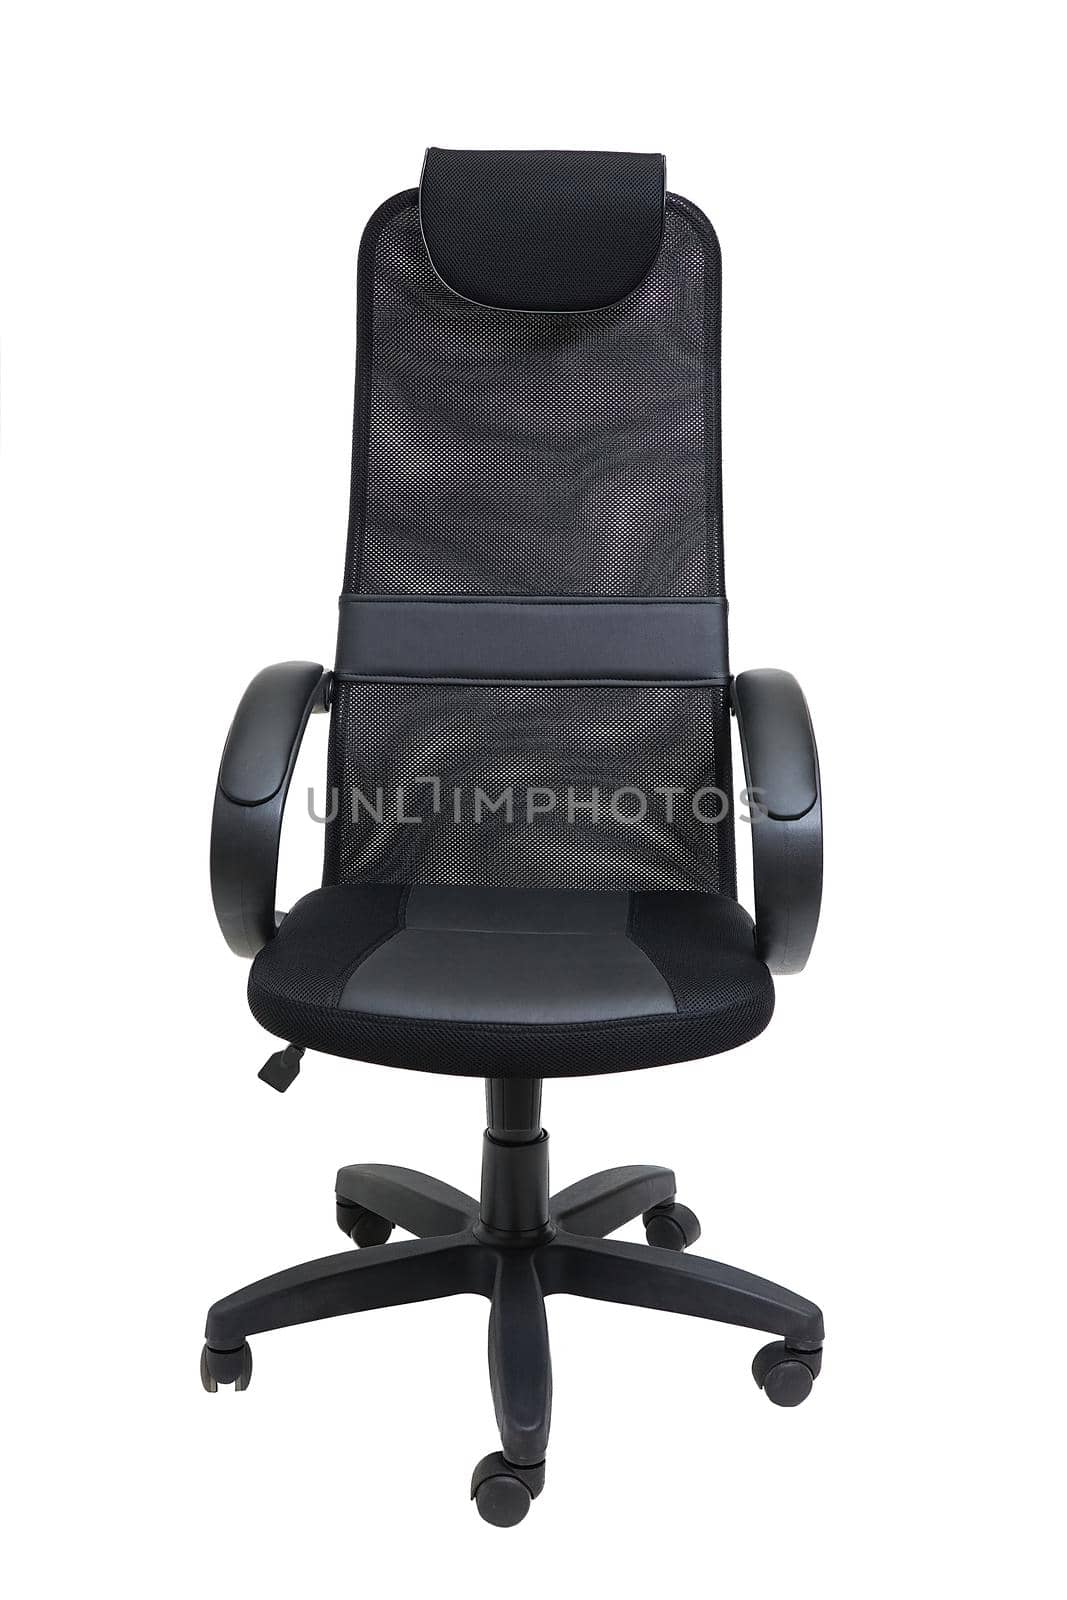 black office fabric armchair on wheels isolated on white background, front view. modern furniture, interior, home design